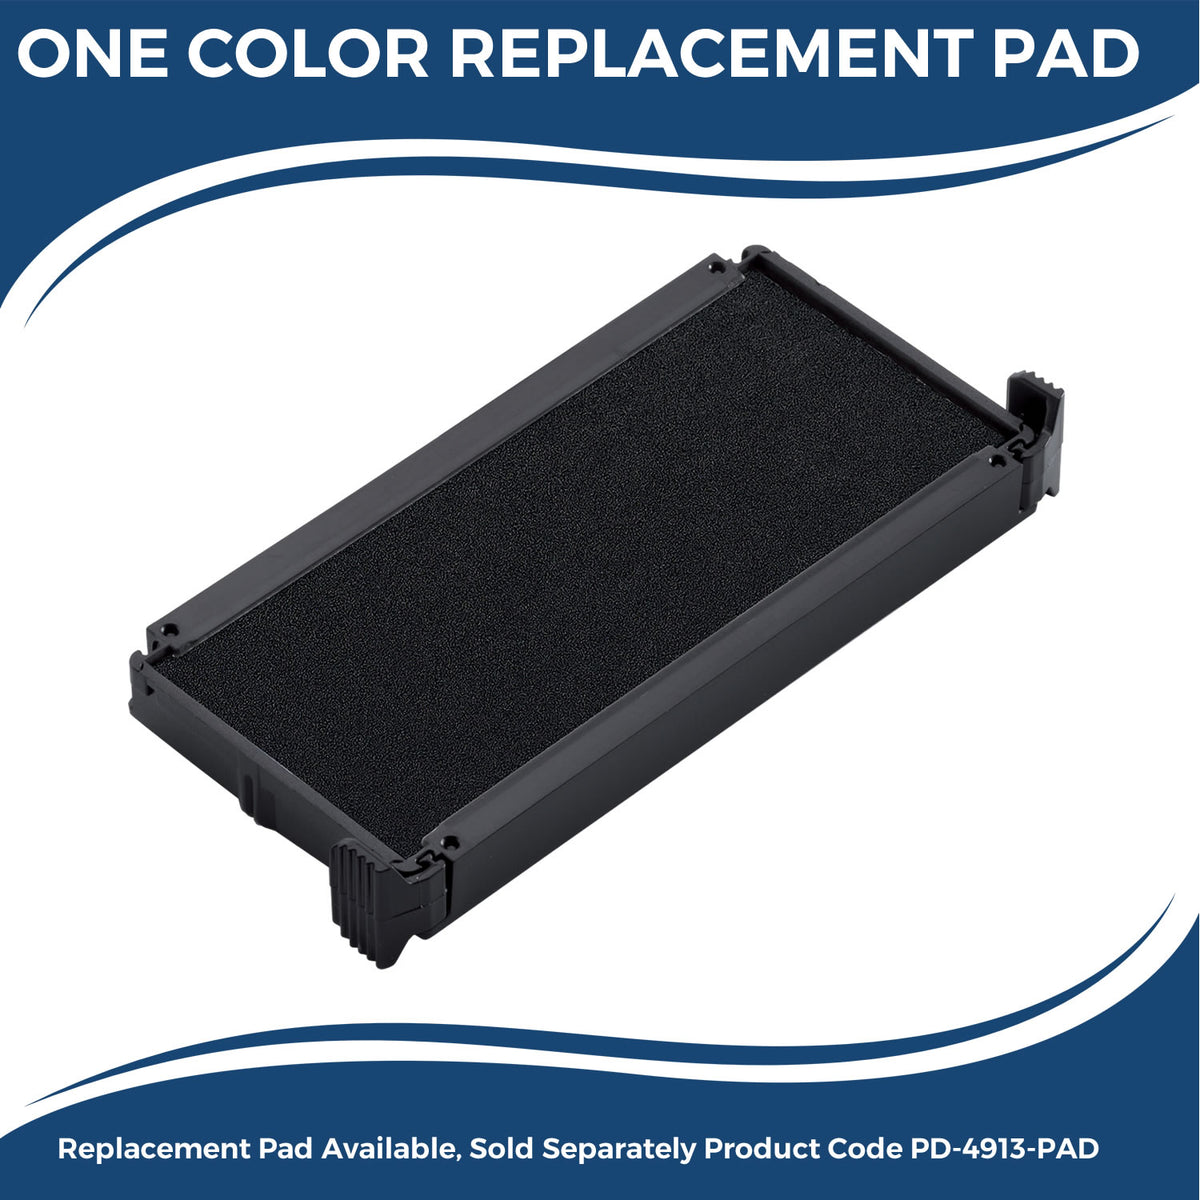 Large Self Inking Homework Complete Stamp 4690S Large Replacment Pad